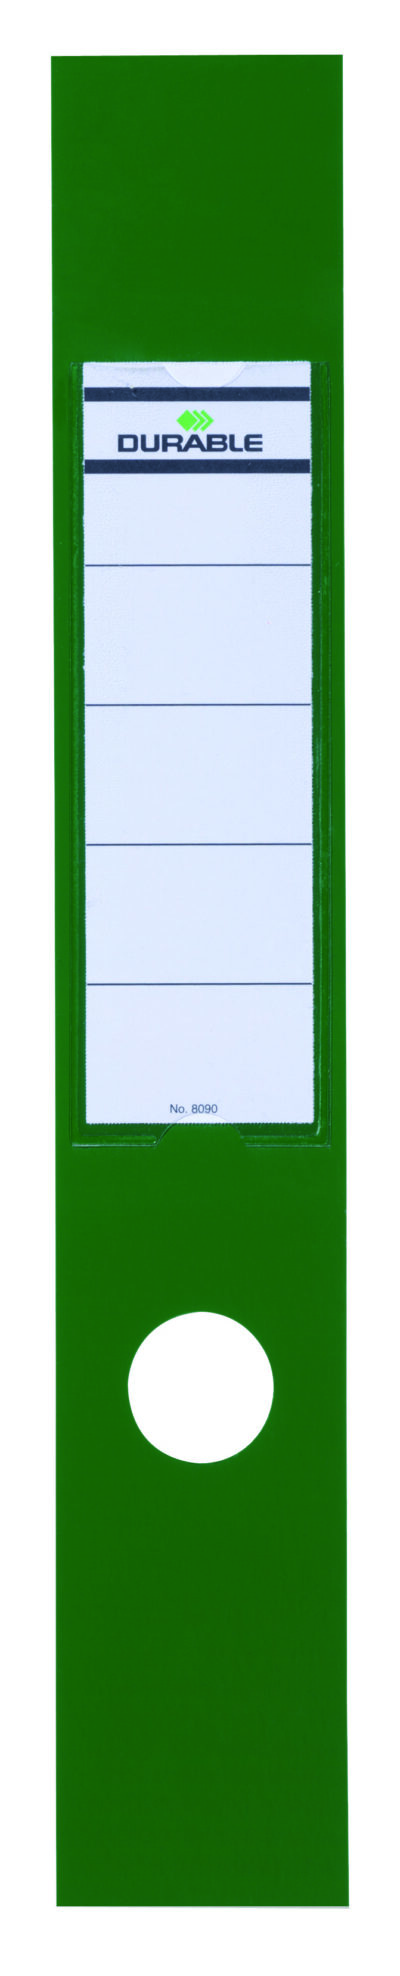 Durable Ordofix Lever Arch File Spine Label PVC 60x390mm Green (Pack 10) – 809005